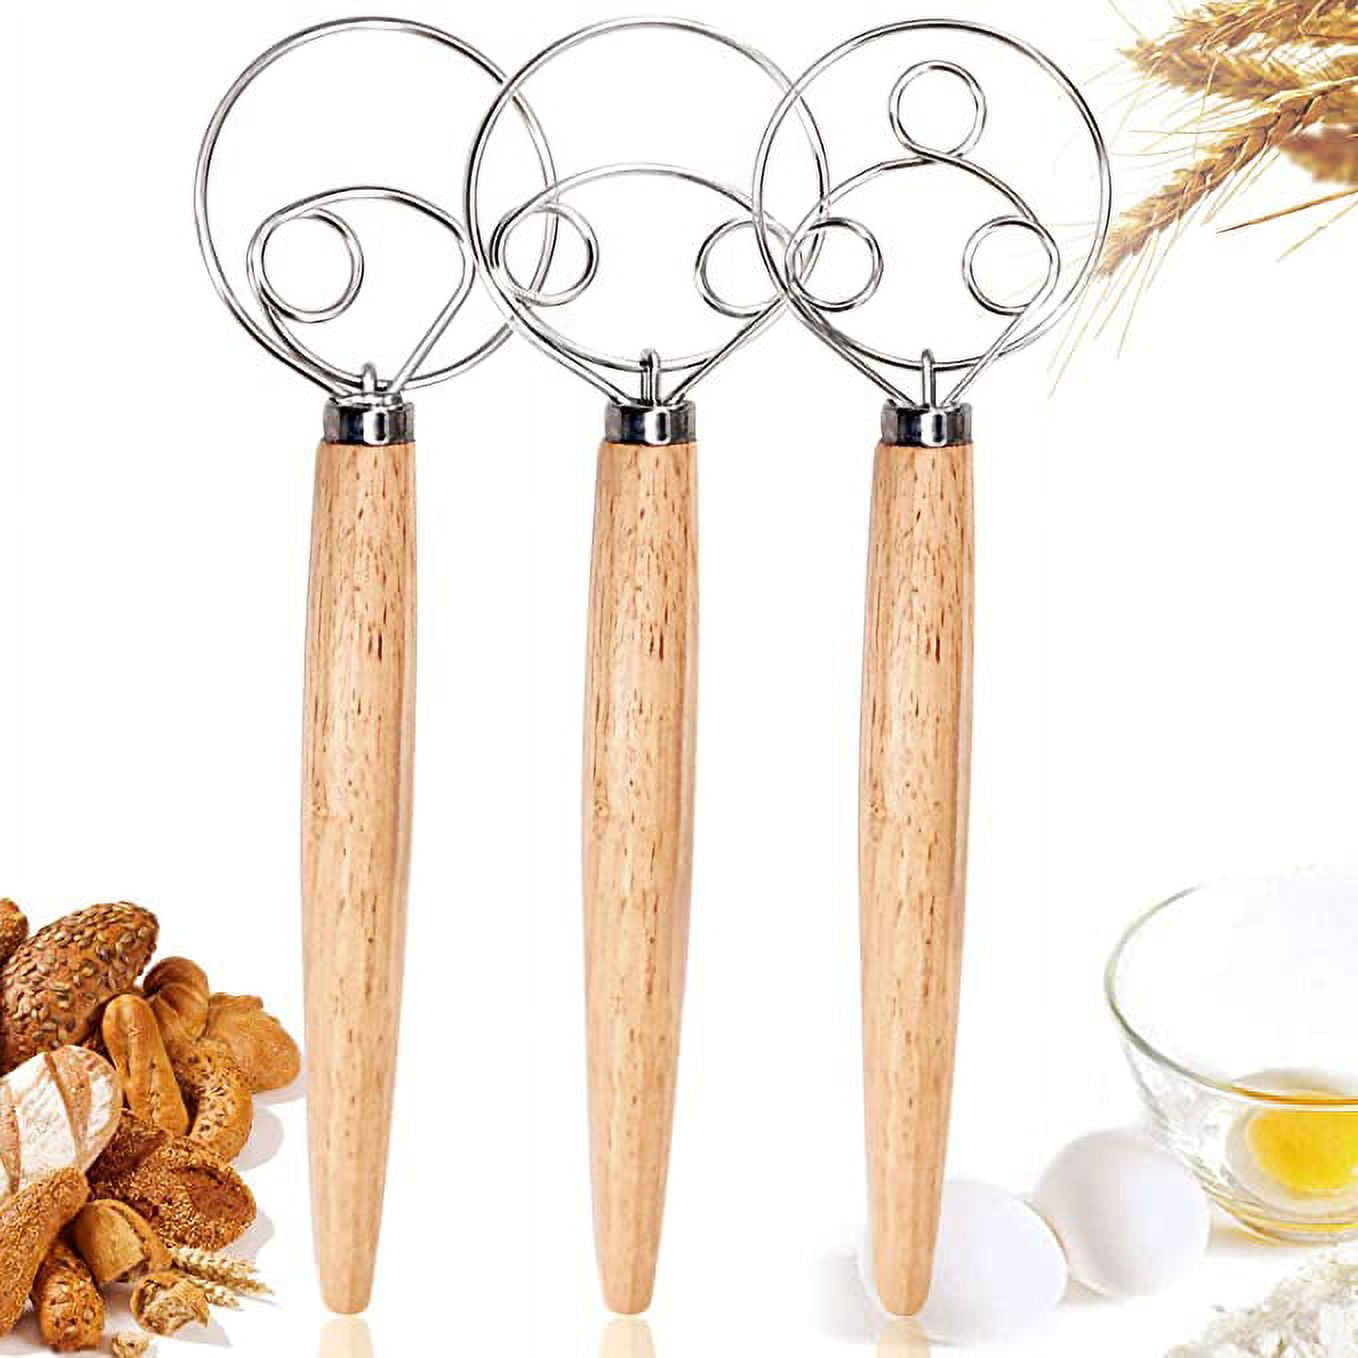 3 Pack Original Danish Dough Whisk Dutch Style 13 Stainless Steel Large  Wooden Hand Dough Mixer Baking Tool For Bread, Batter, Cake, Pastry,  Pancake mixer, Cookie Dough Mixer For Cooking and Baking 